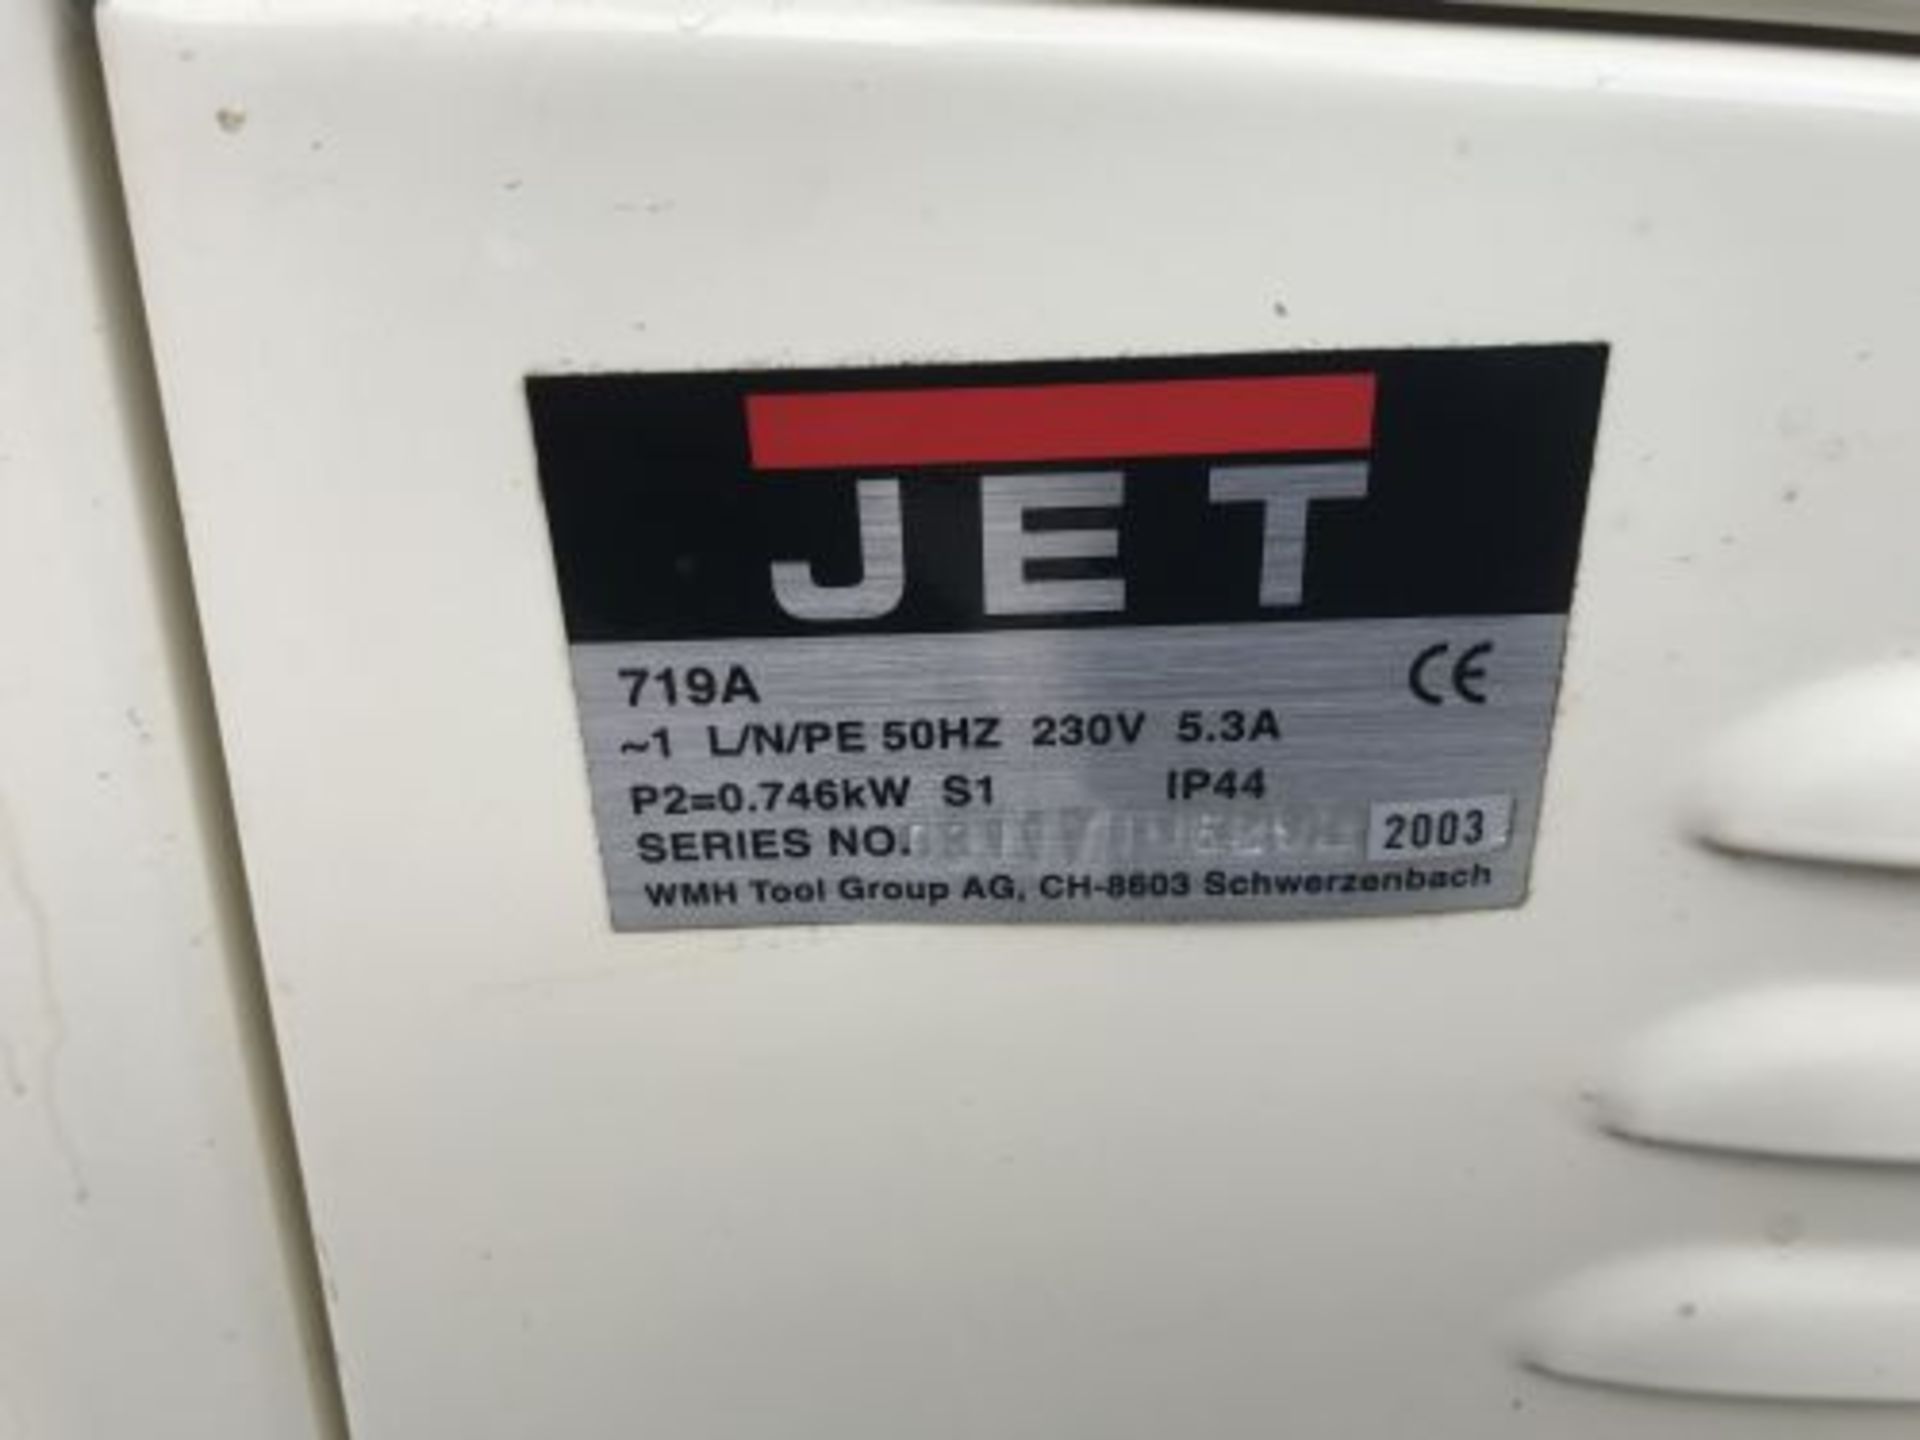 Jet MORTICER, year of manufacture 2003, 240v, with - Image 4 of 6